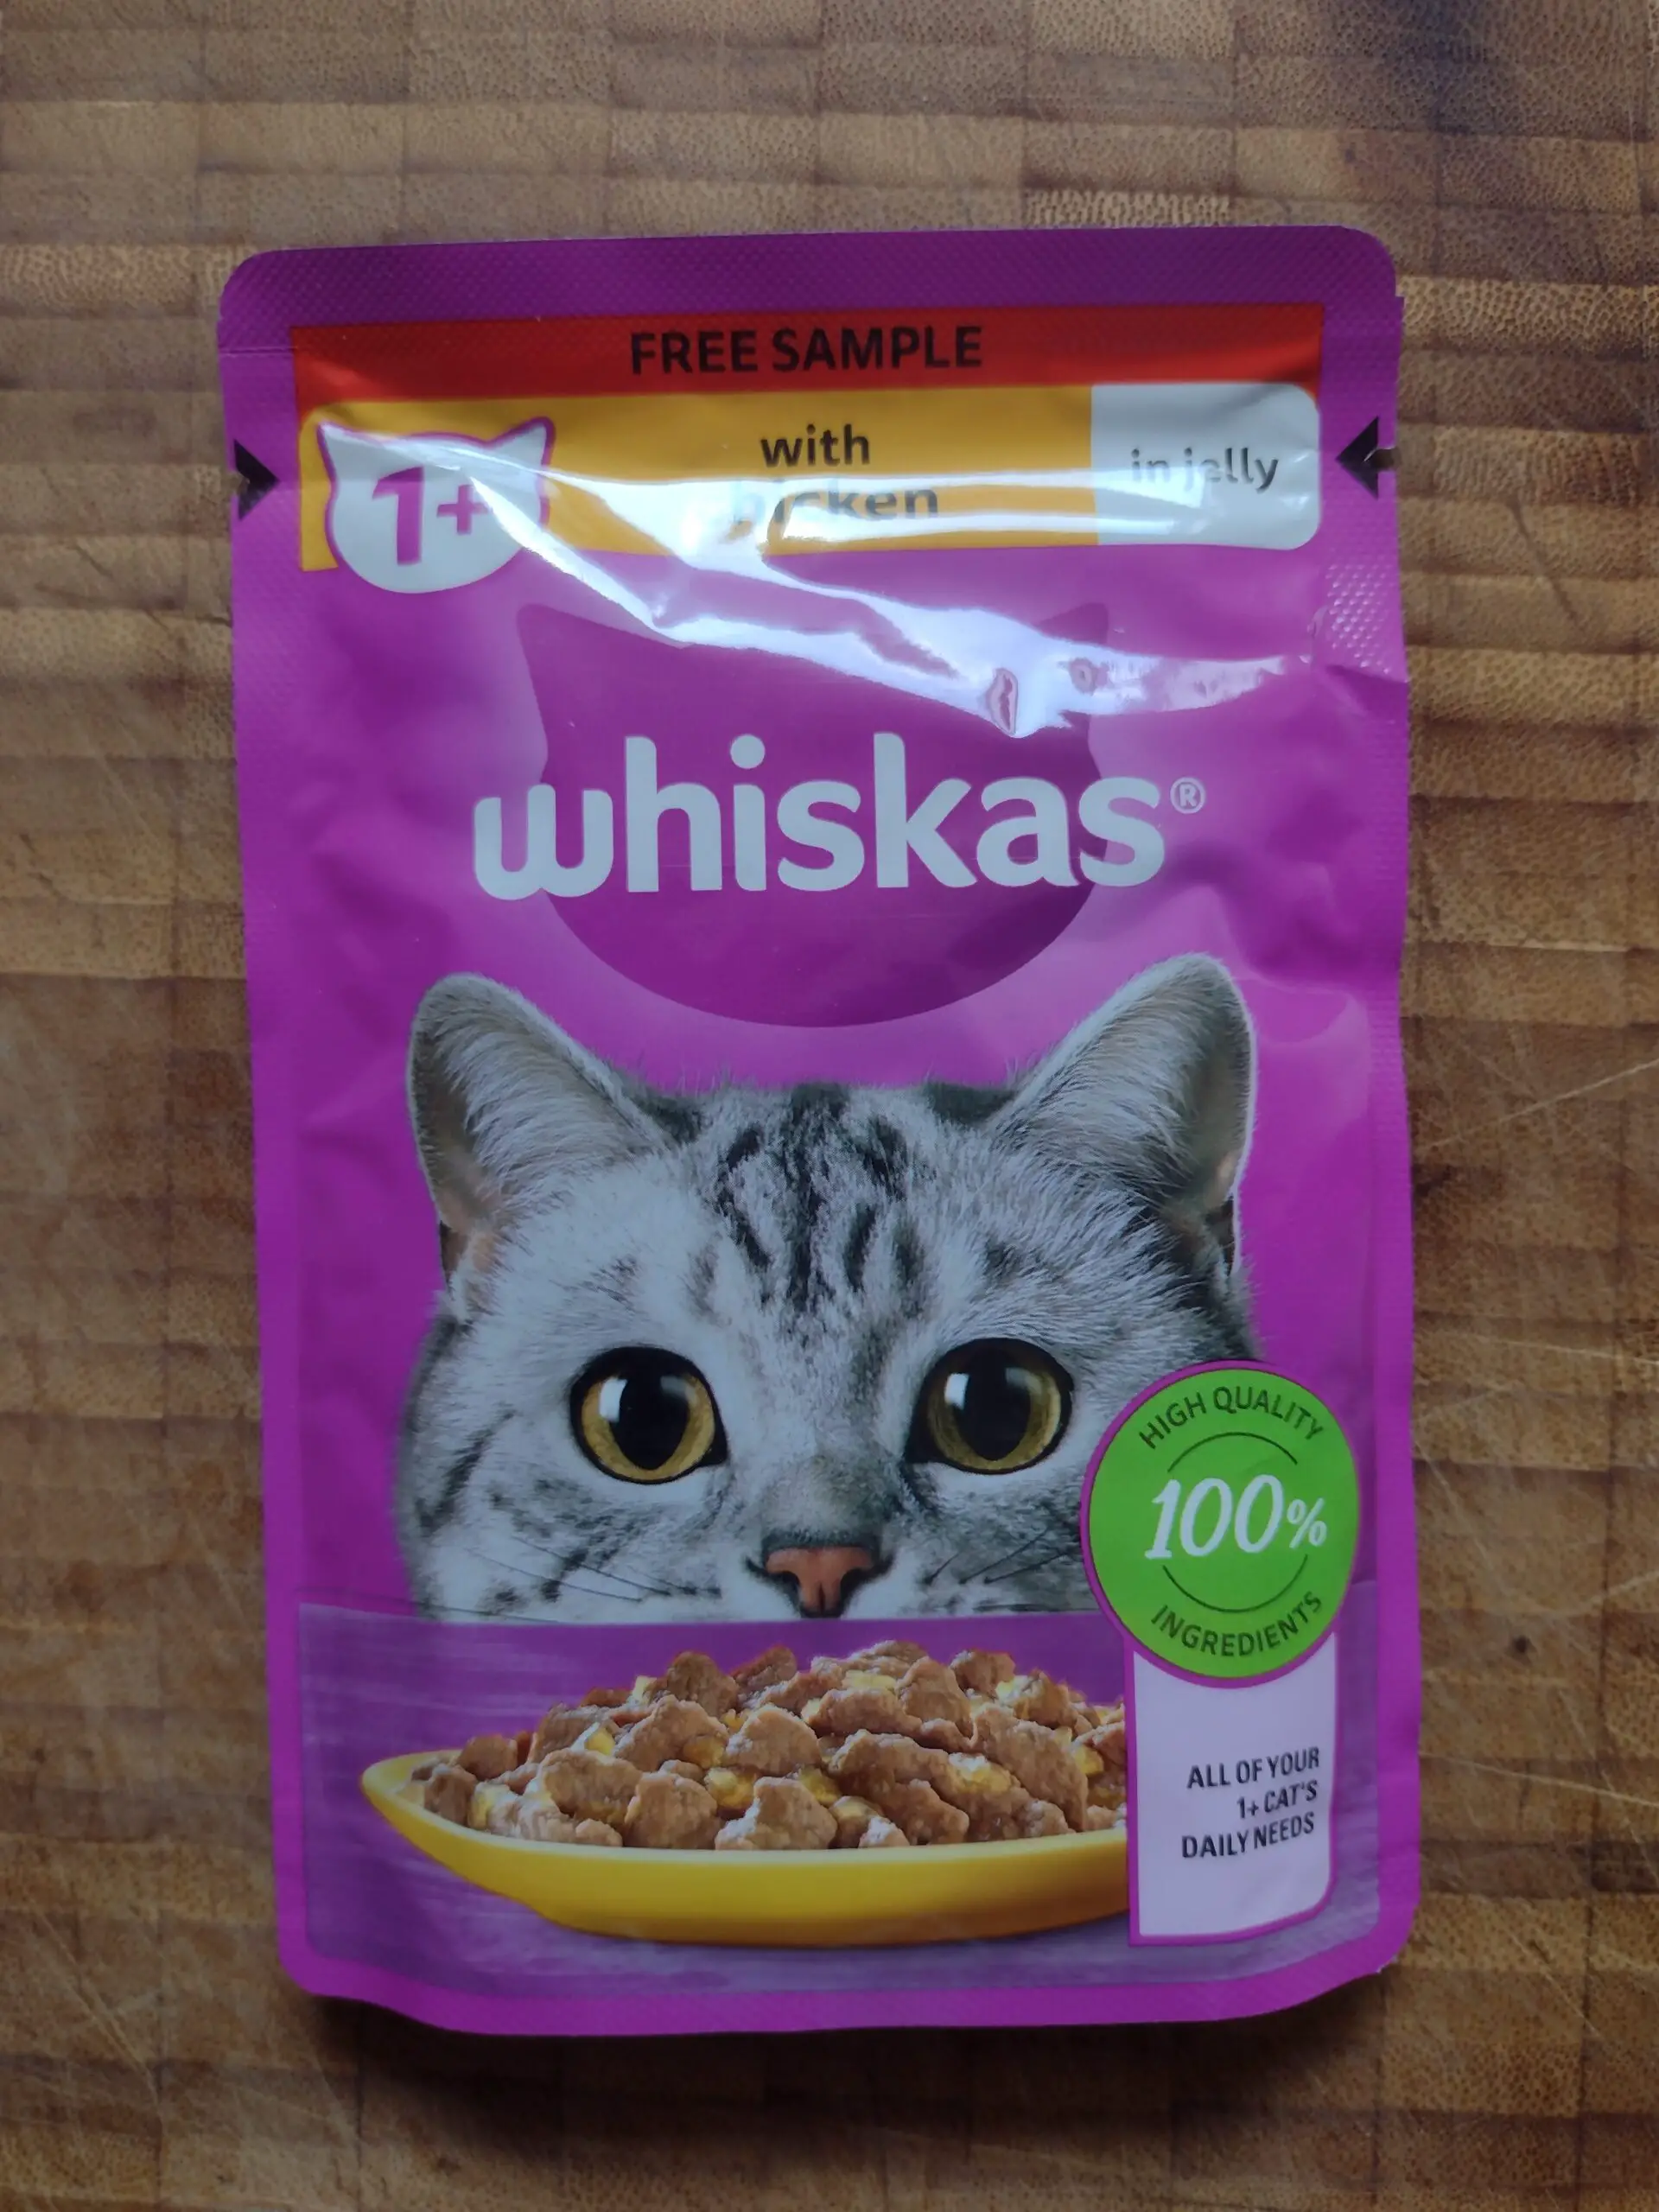 front Receiving & Reviewing my FREE Sample of Whiskas Cat Food save money deal offer discount promotion review flavour pouch sachet jelly post mail delivery freebies packaging cardboard box flyer hashtag size wet brand website